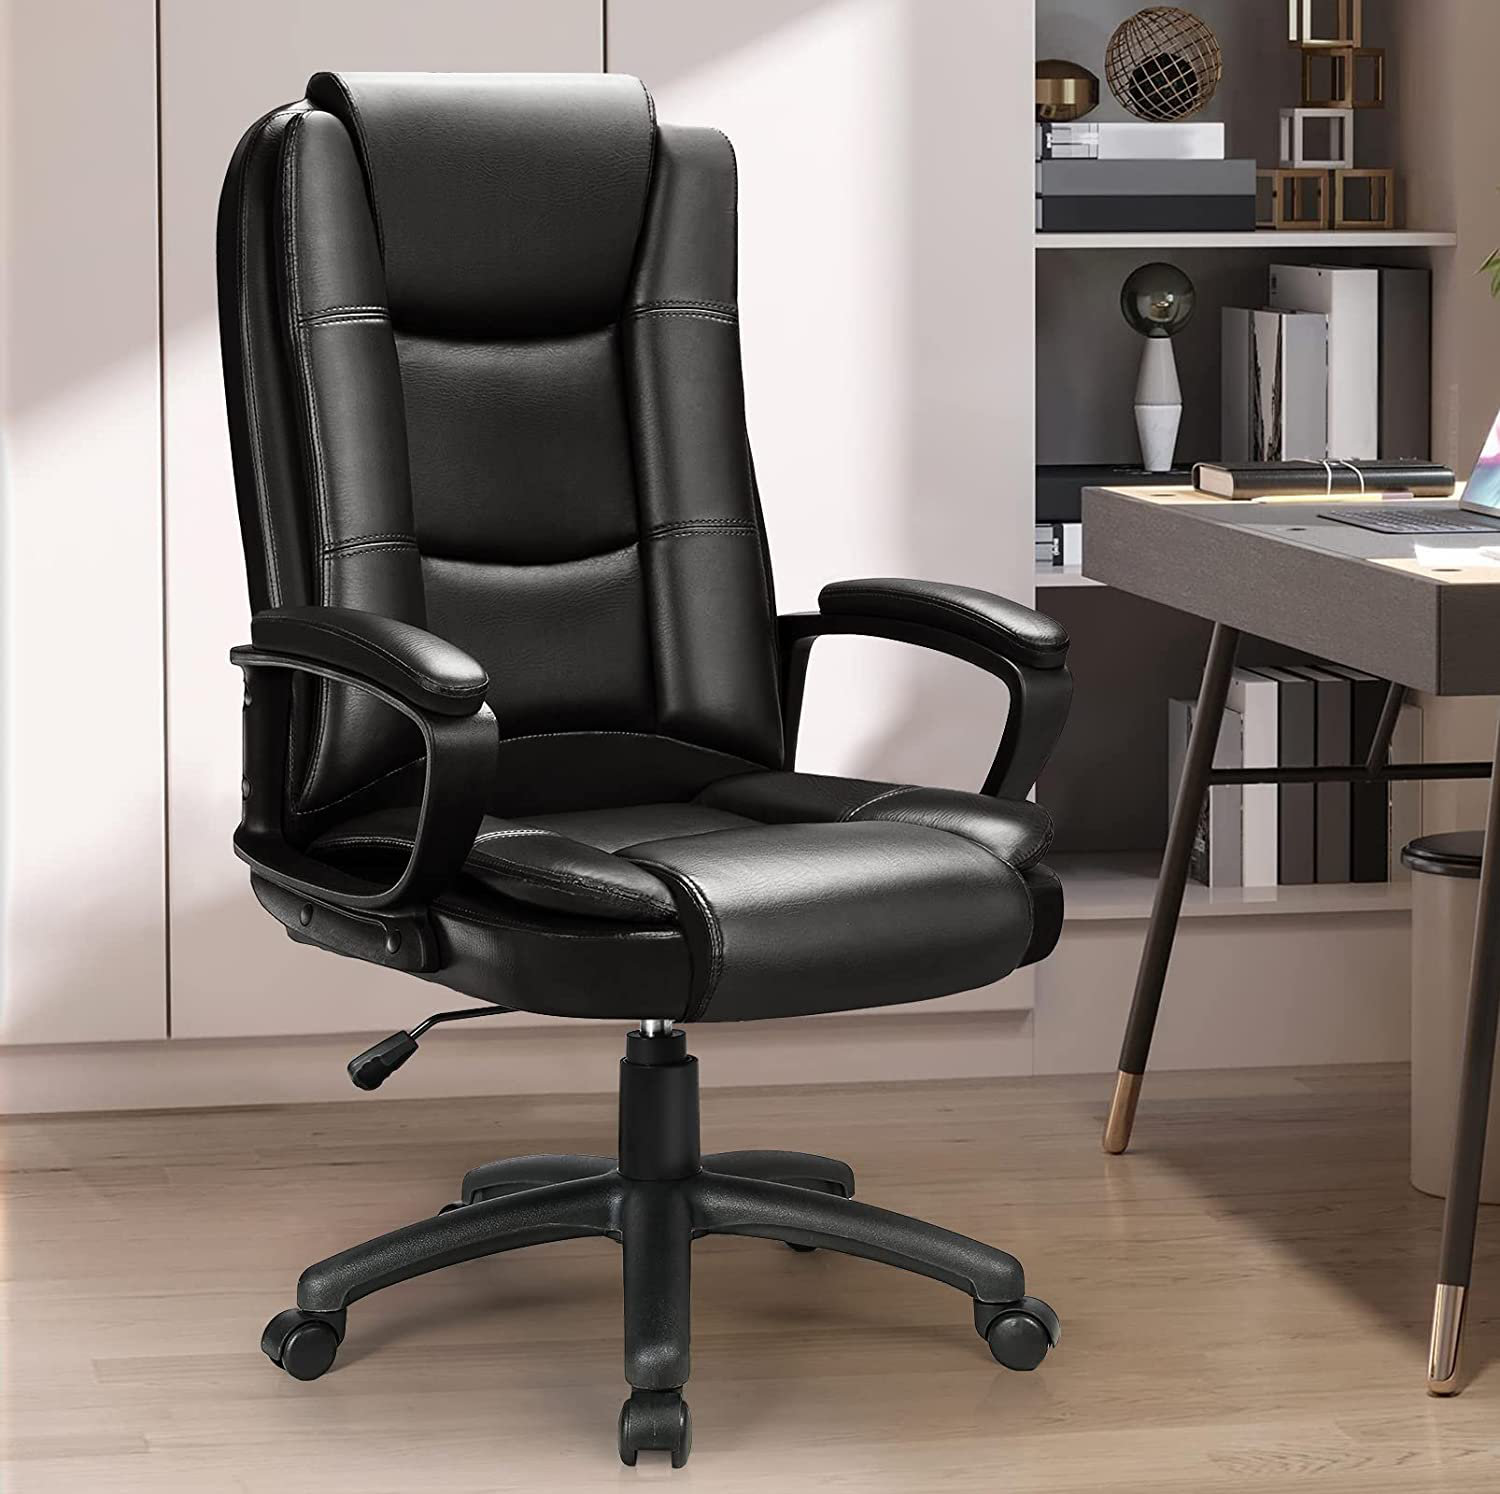 Inbox Zero Home Office Chair, 400LBS Big and Tall Heavy Duty 